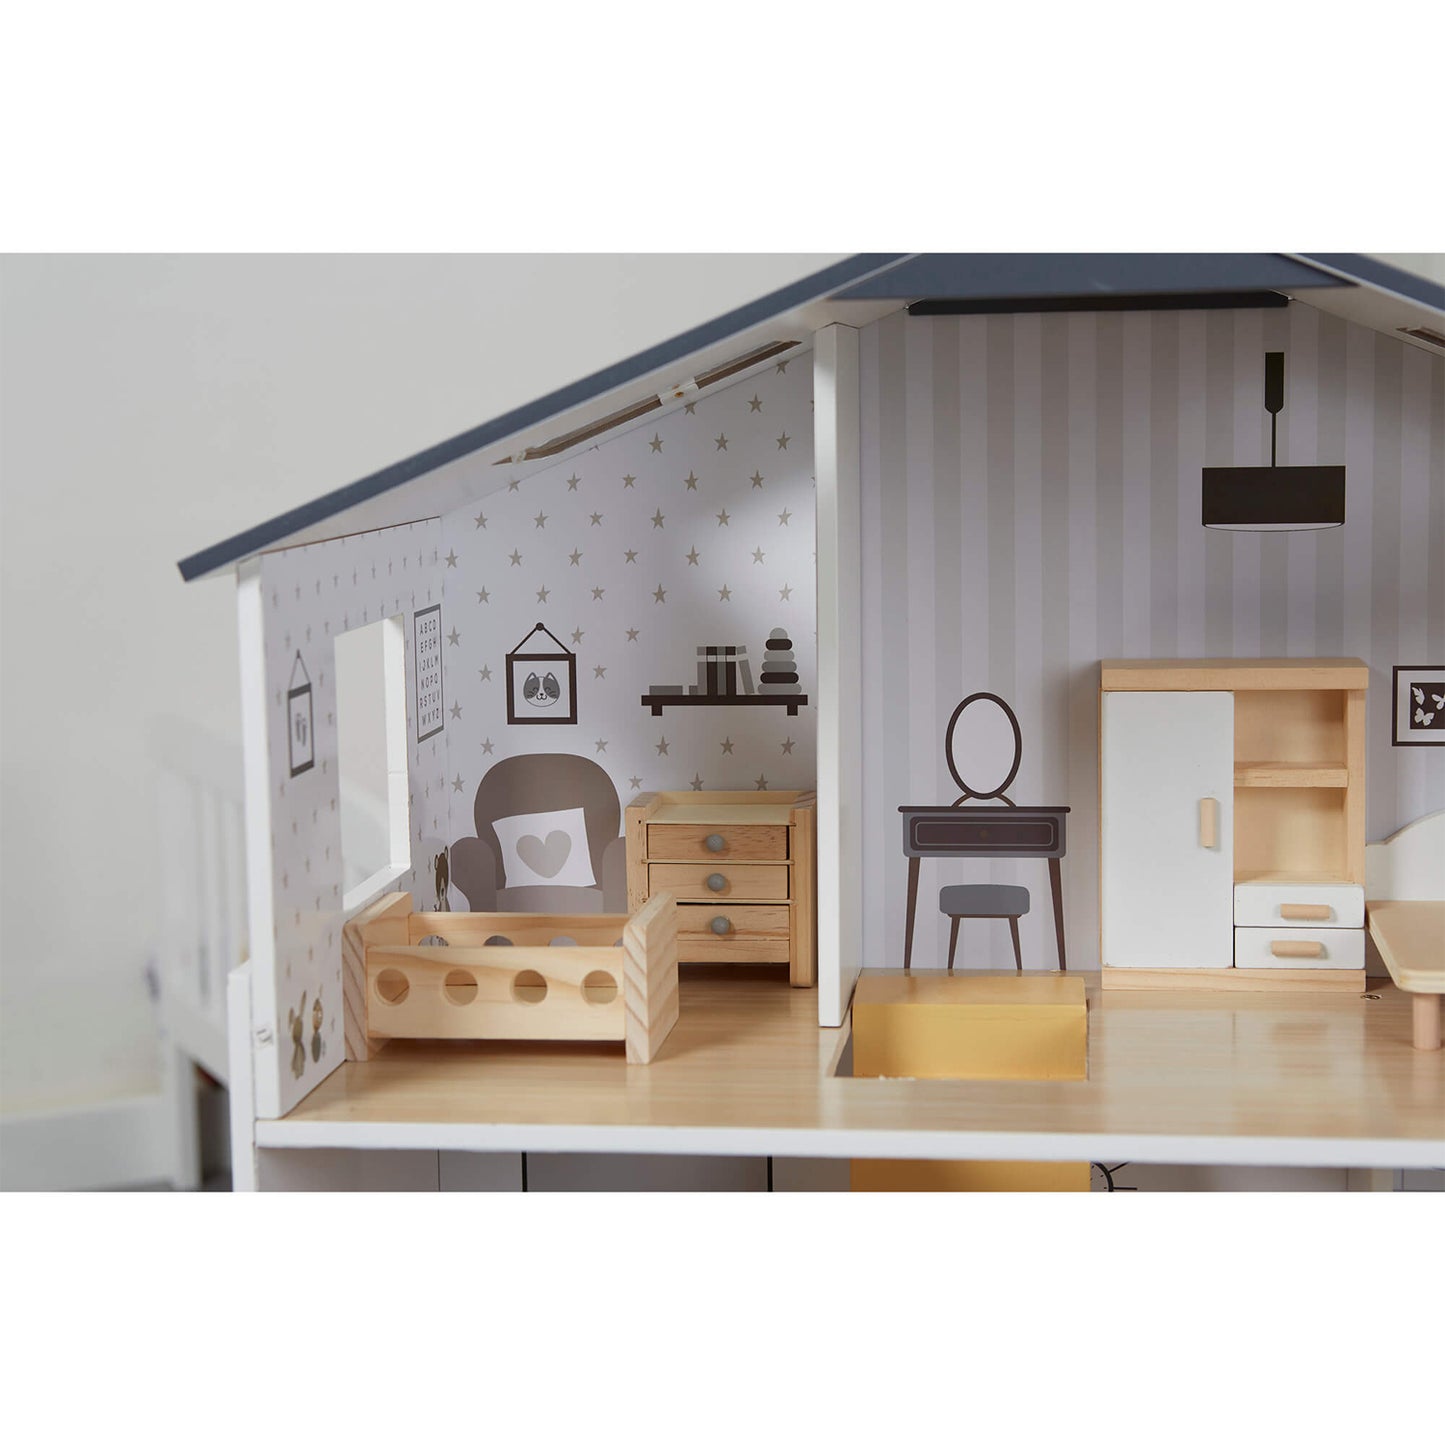 Contemporary Dolls House with 18 Handcrafted Wood Furniture Accessories by Liberty House Toys